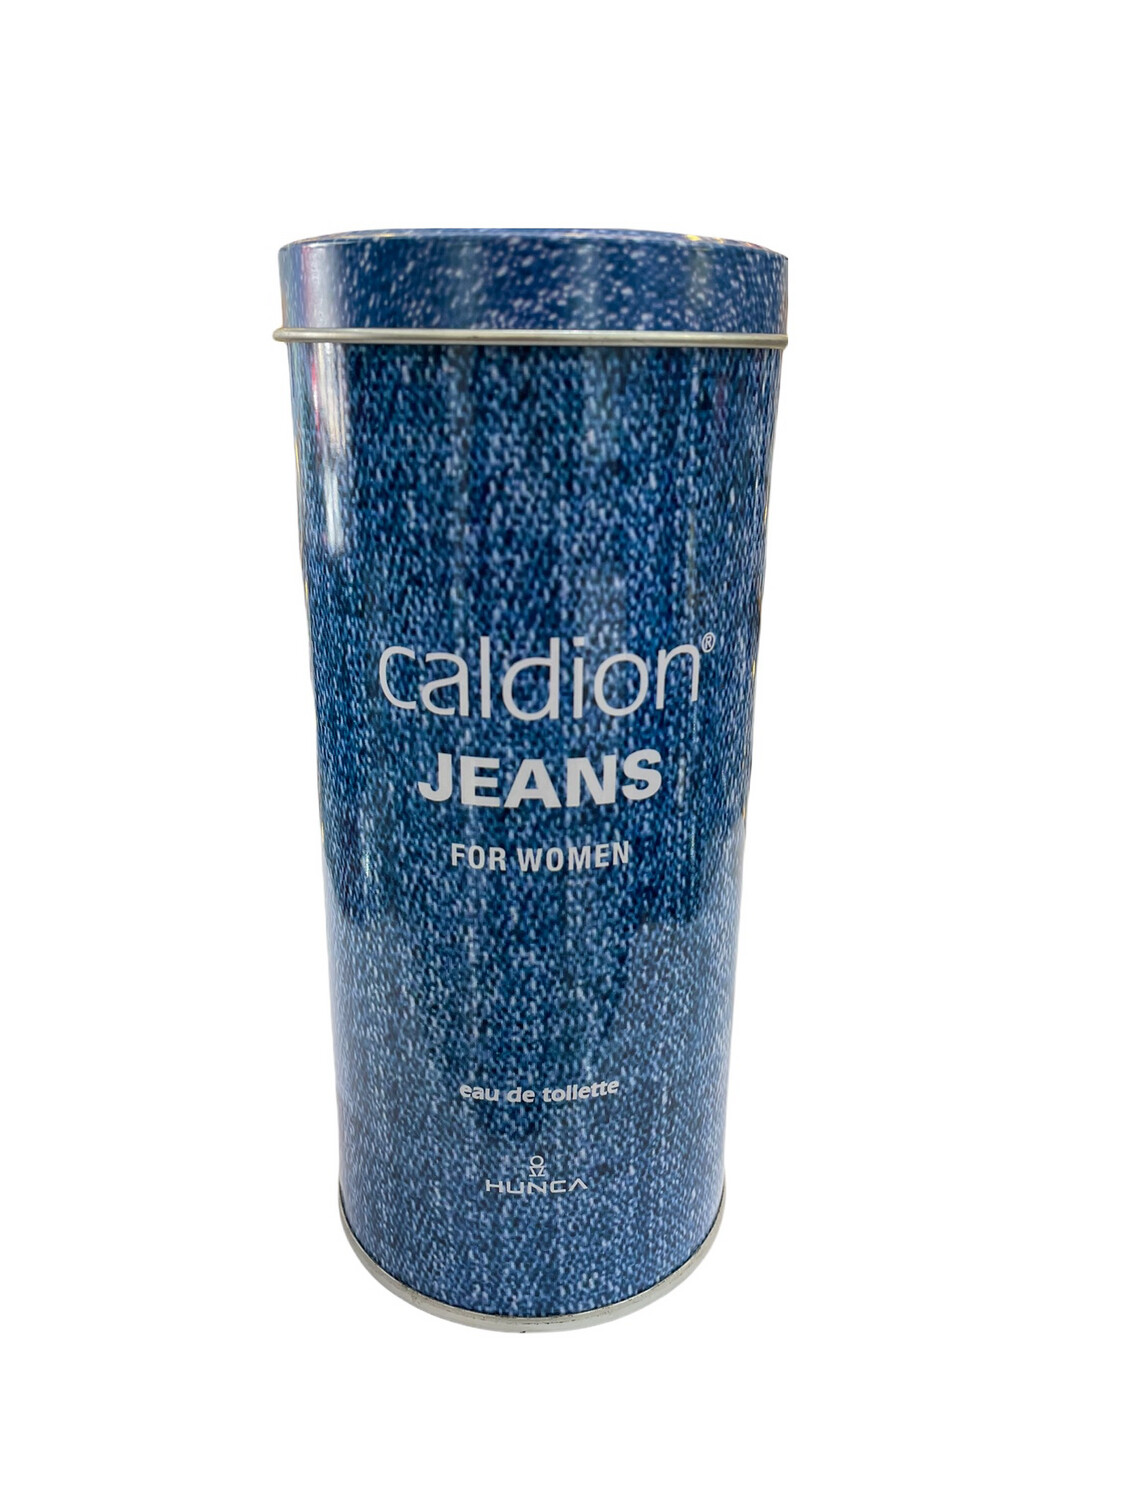 Caldion Jeans For Women